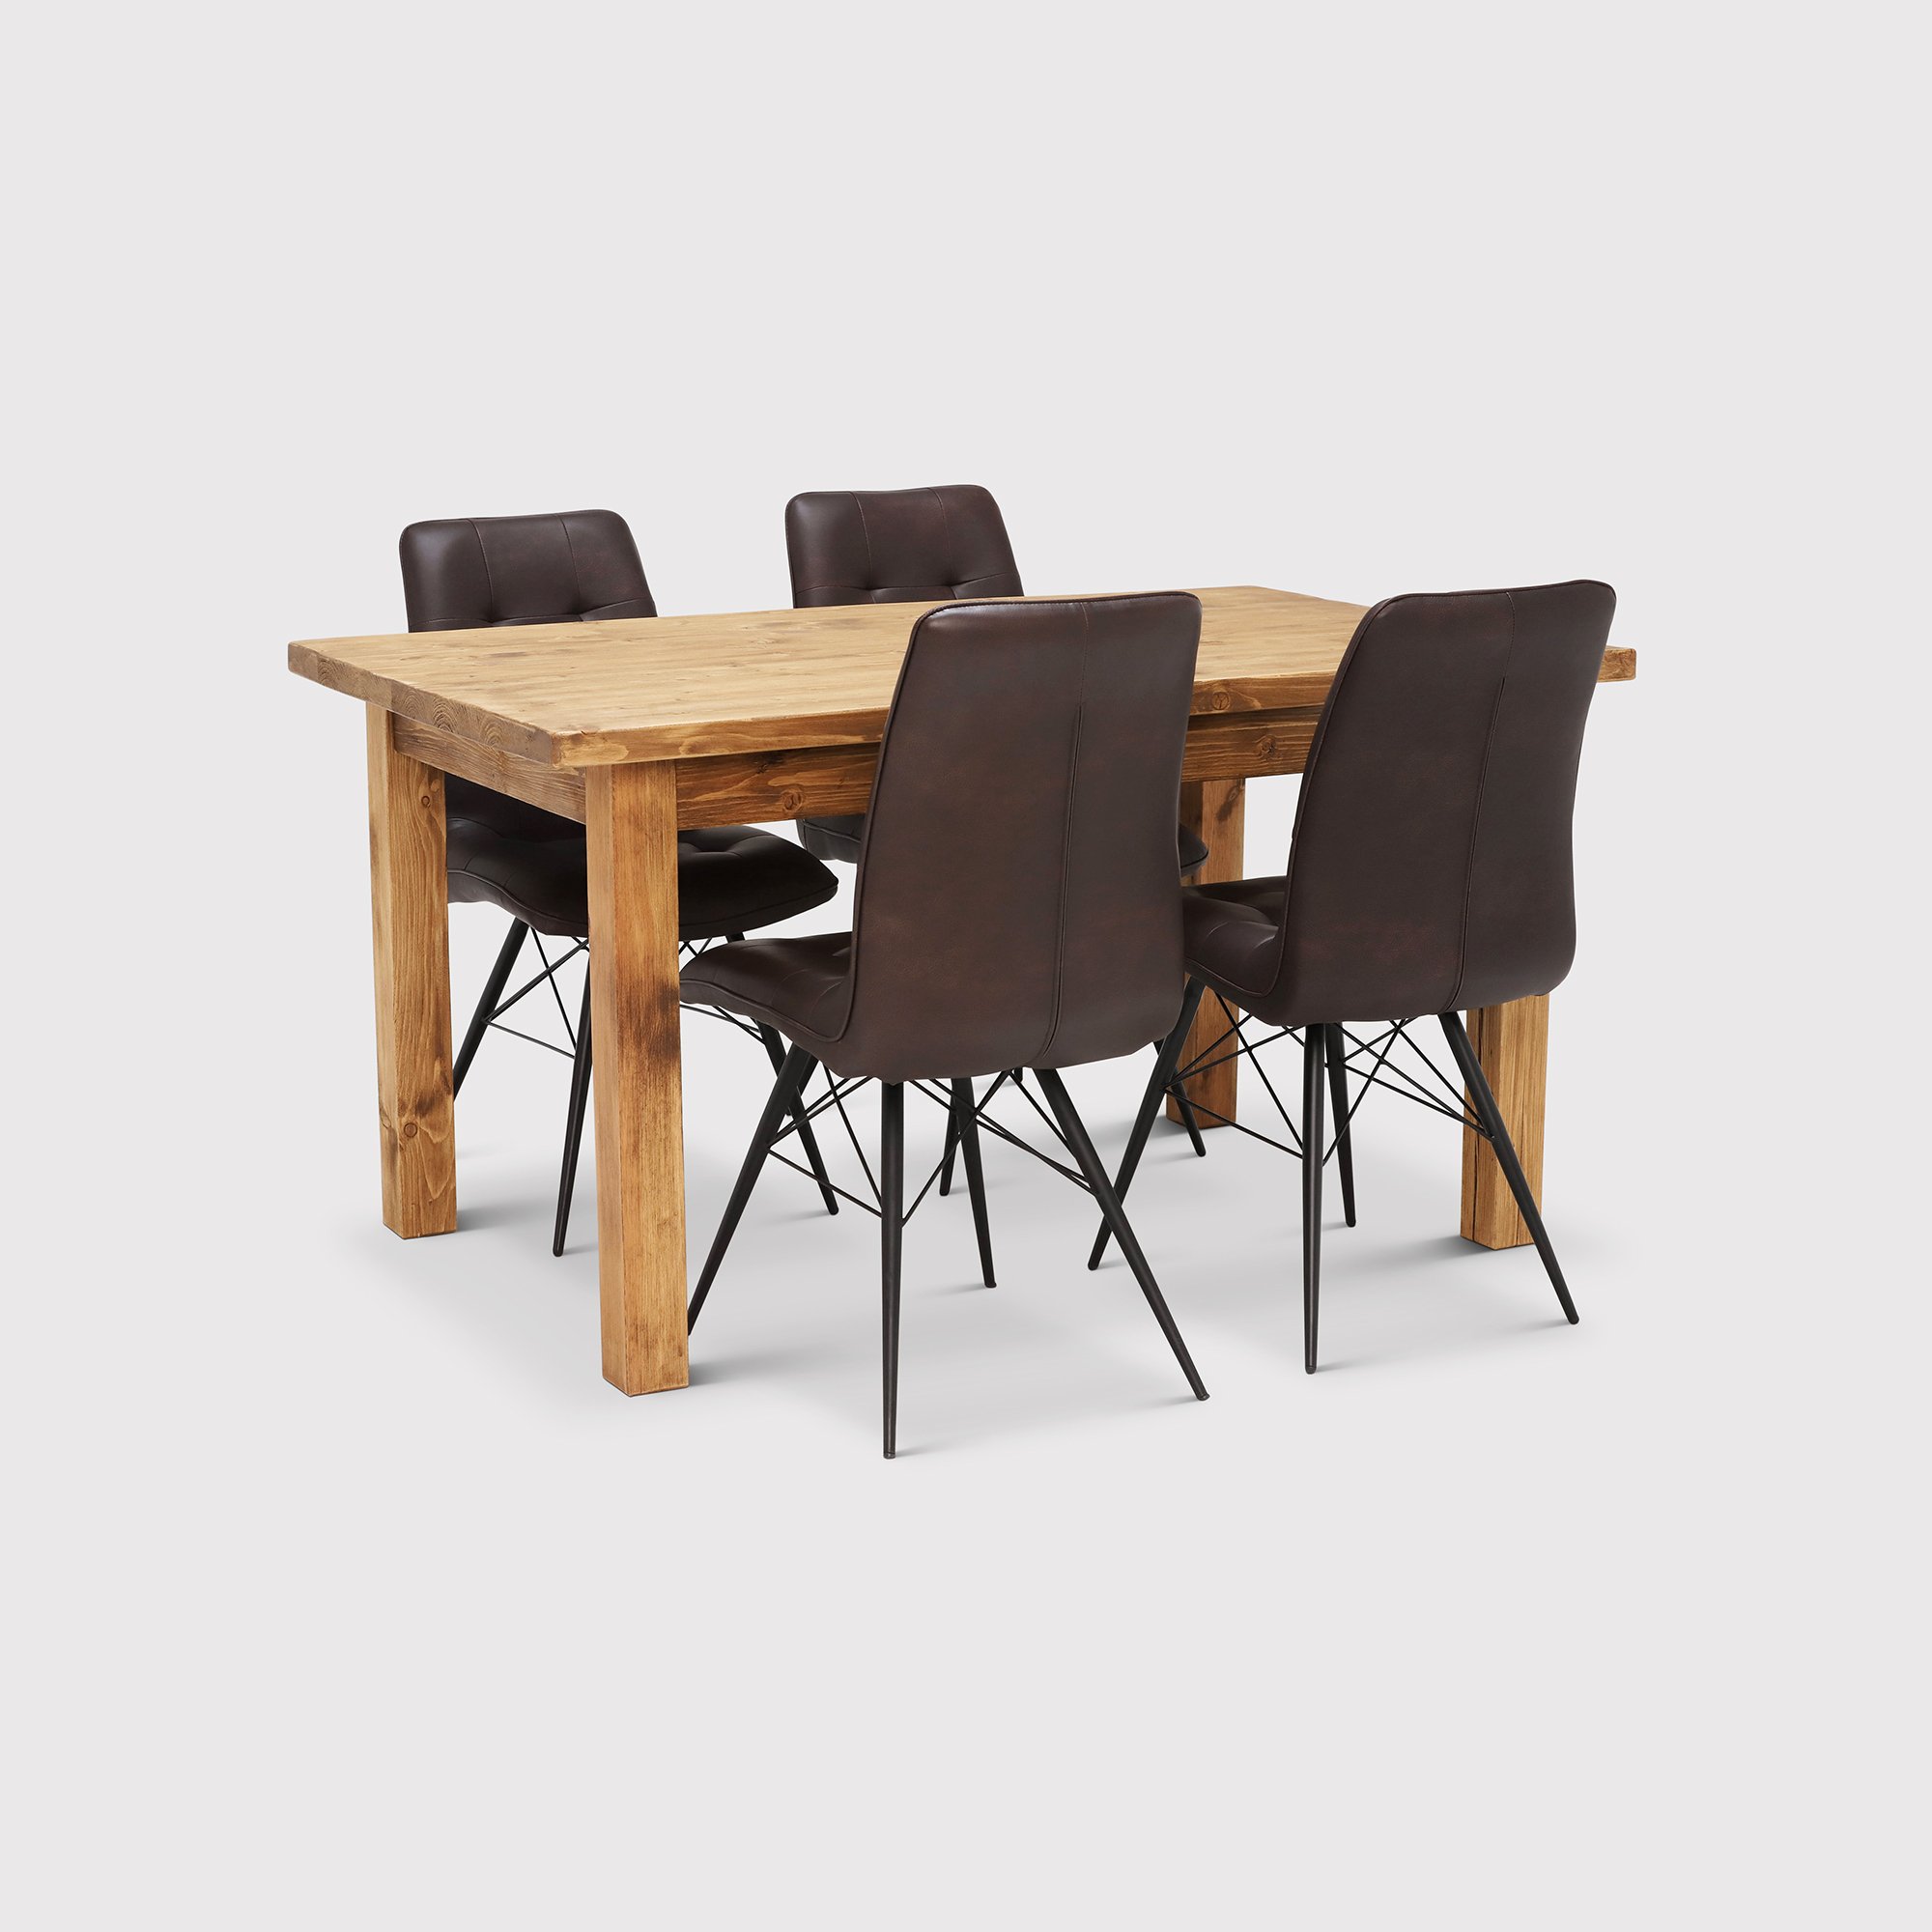 Covington Dining Table & 4 Hix Chairs, Timber Wood | Barker & Stonehouse